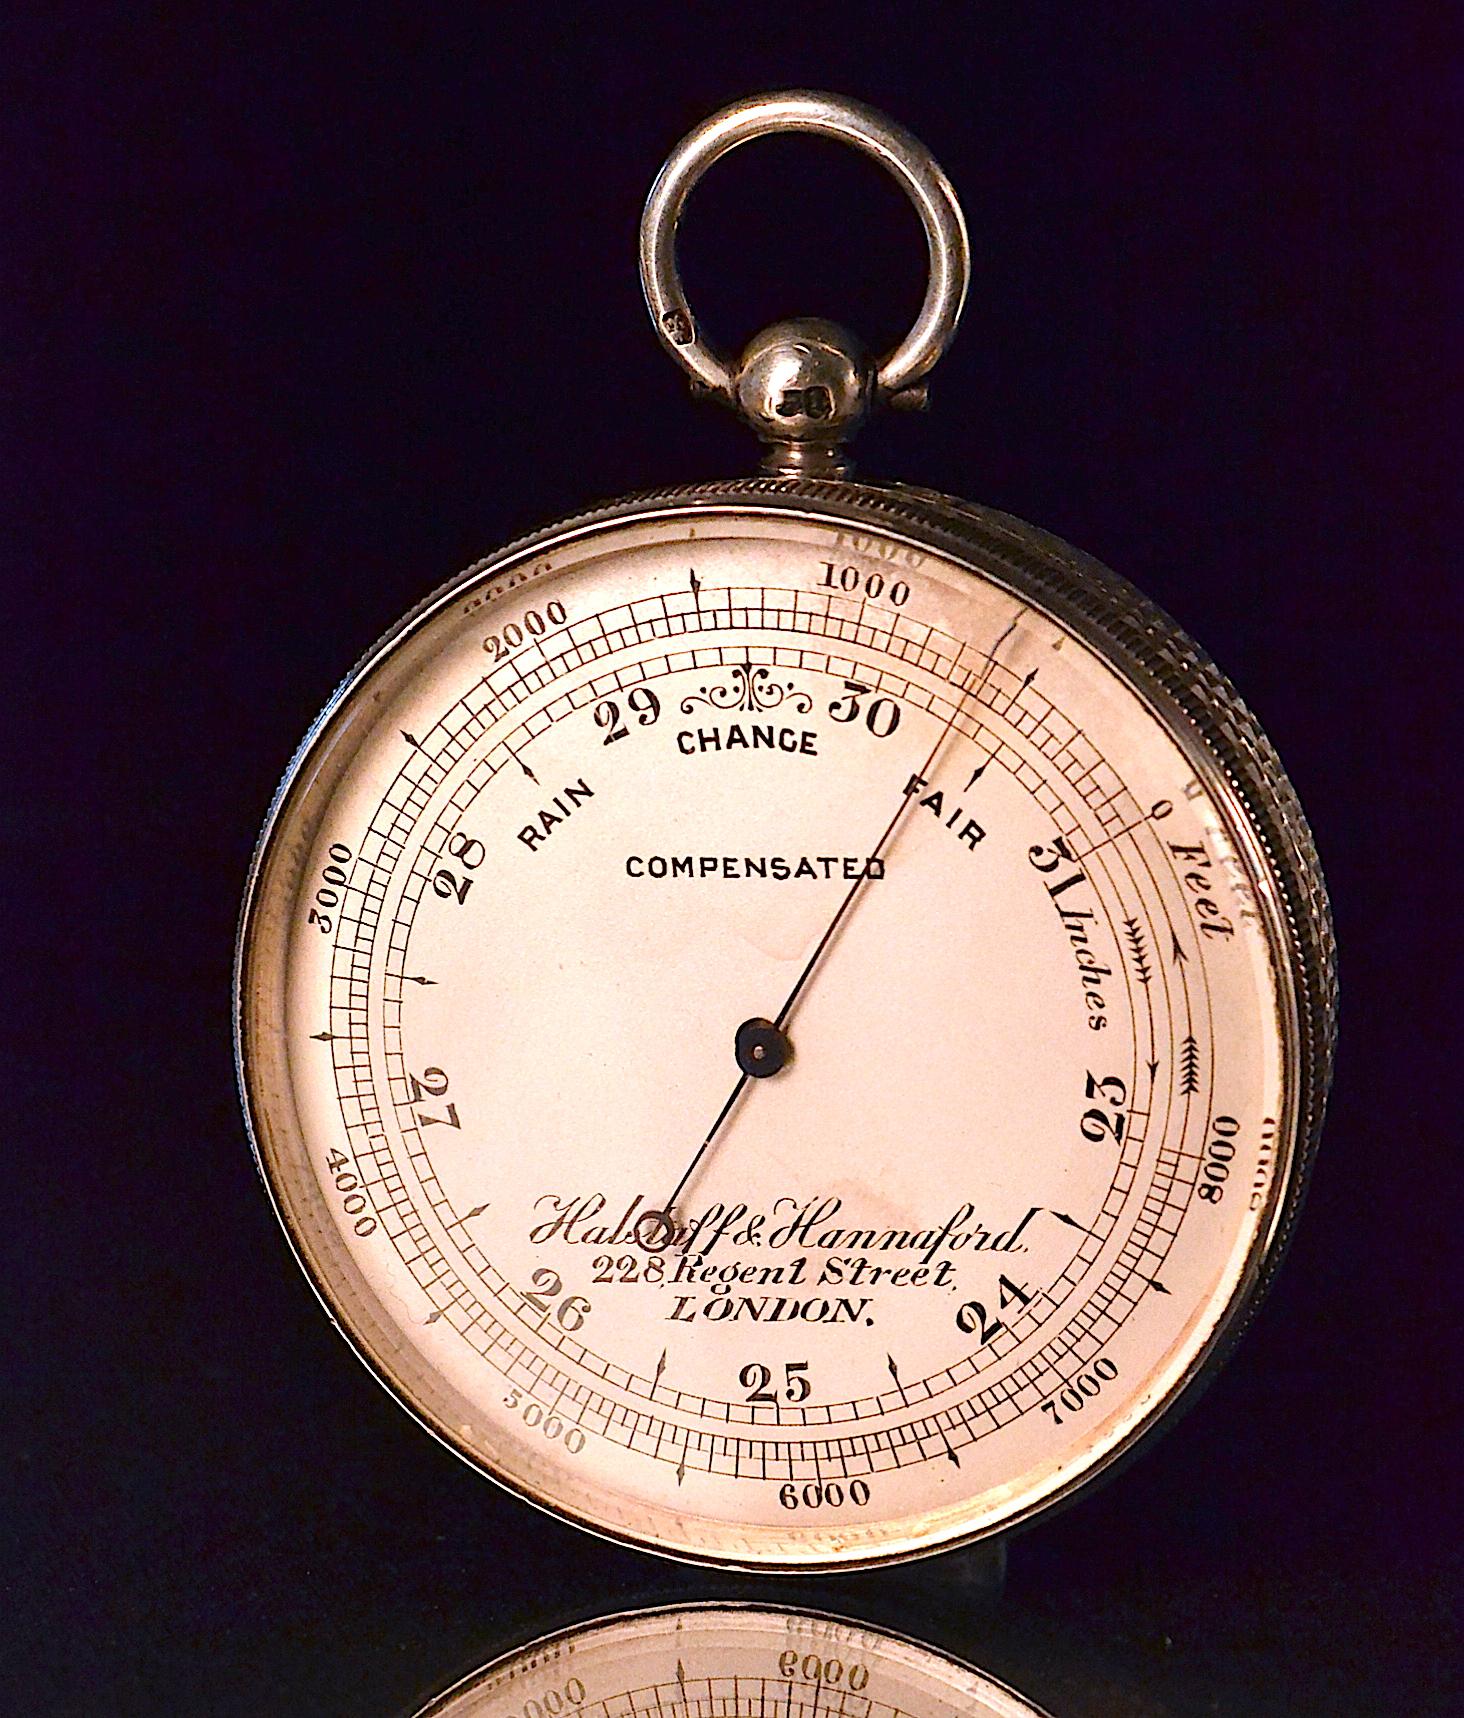 An ornate cast silver pocket barometer with engraved dial Halstaff and Hannaford 228 Regent Street London. Case hallmarked London 1874 maker James Oliver.

James Oliver was a specialist watch case maker (1854-1892) King Square, Goswell Road,